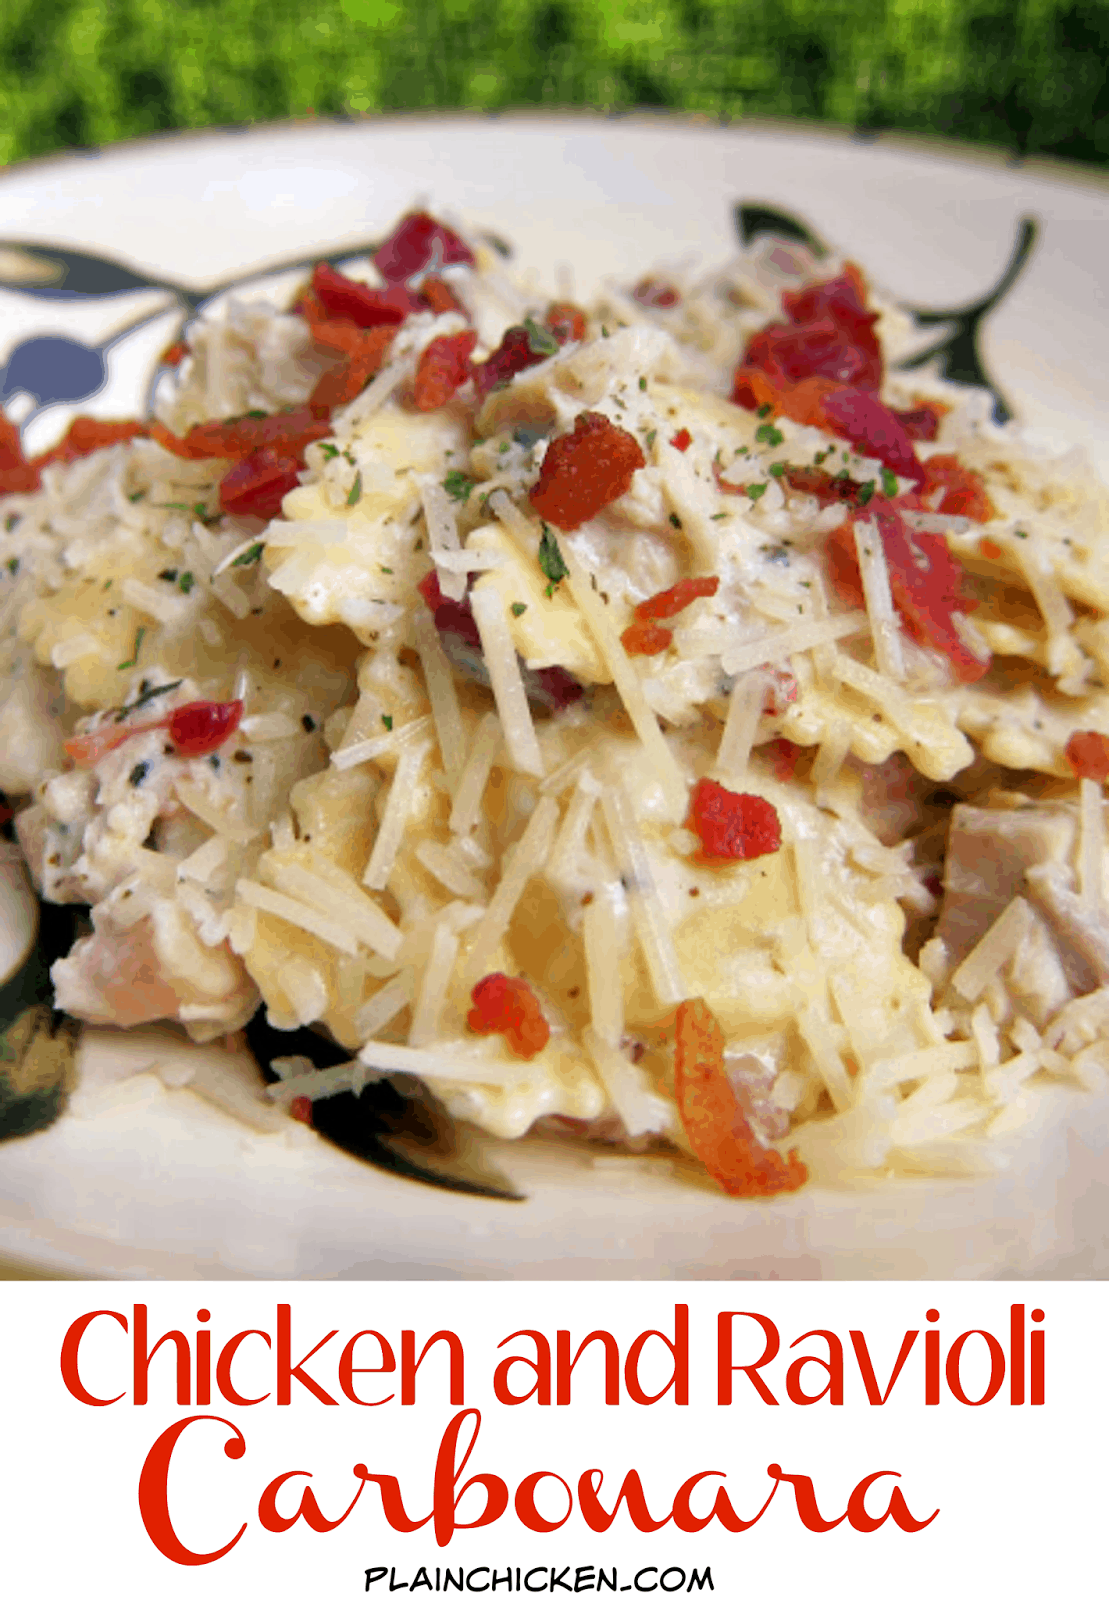 Chicken and Ravioli Carbonara - refrigerated ravioli and chicken tossed in a quick cream sauce and topped with bacon. Ready in under 30 minutes! Great weeknight pasta dish!